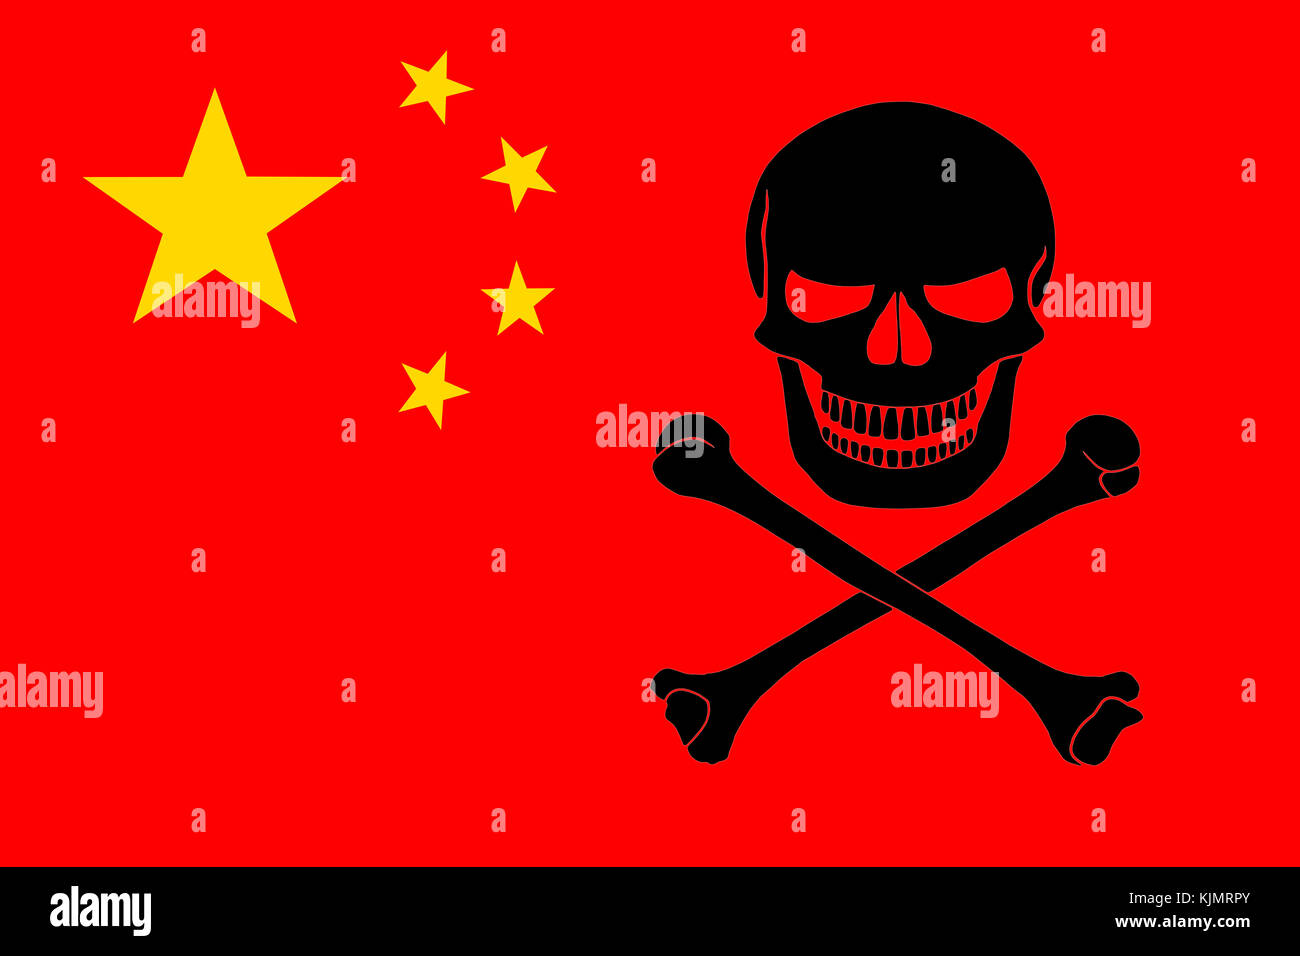 Chinese flag combined with the black pirate image of Jolly Roger with crossbones Stock Photo